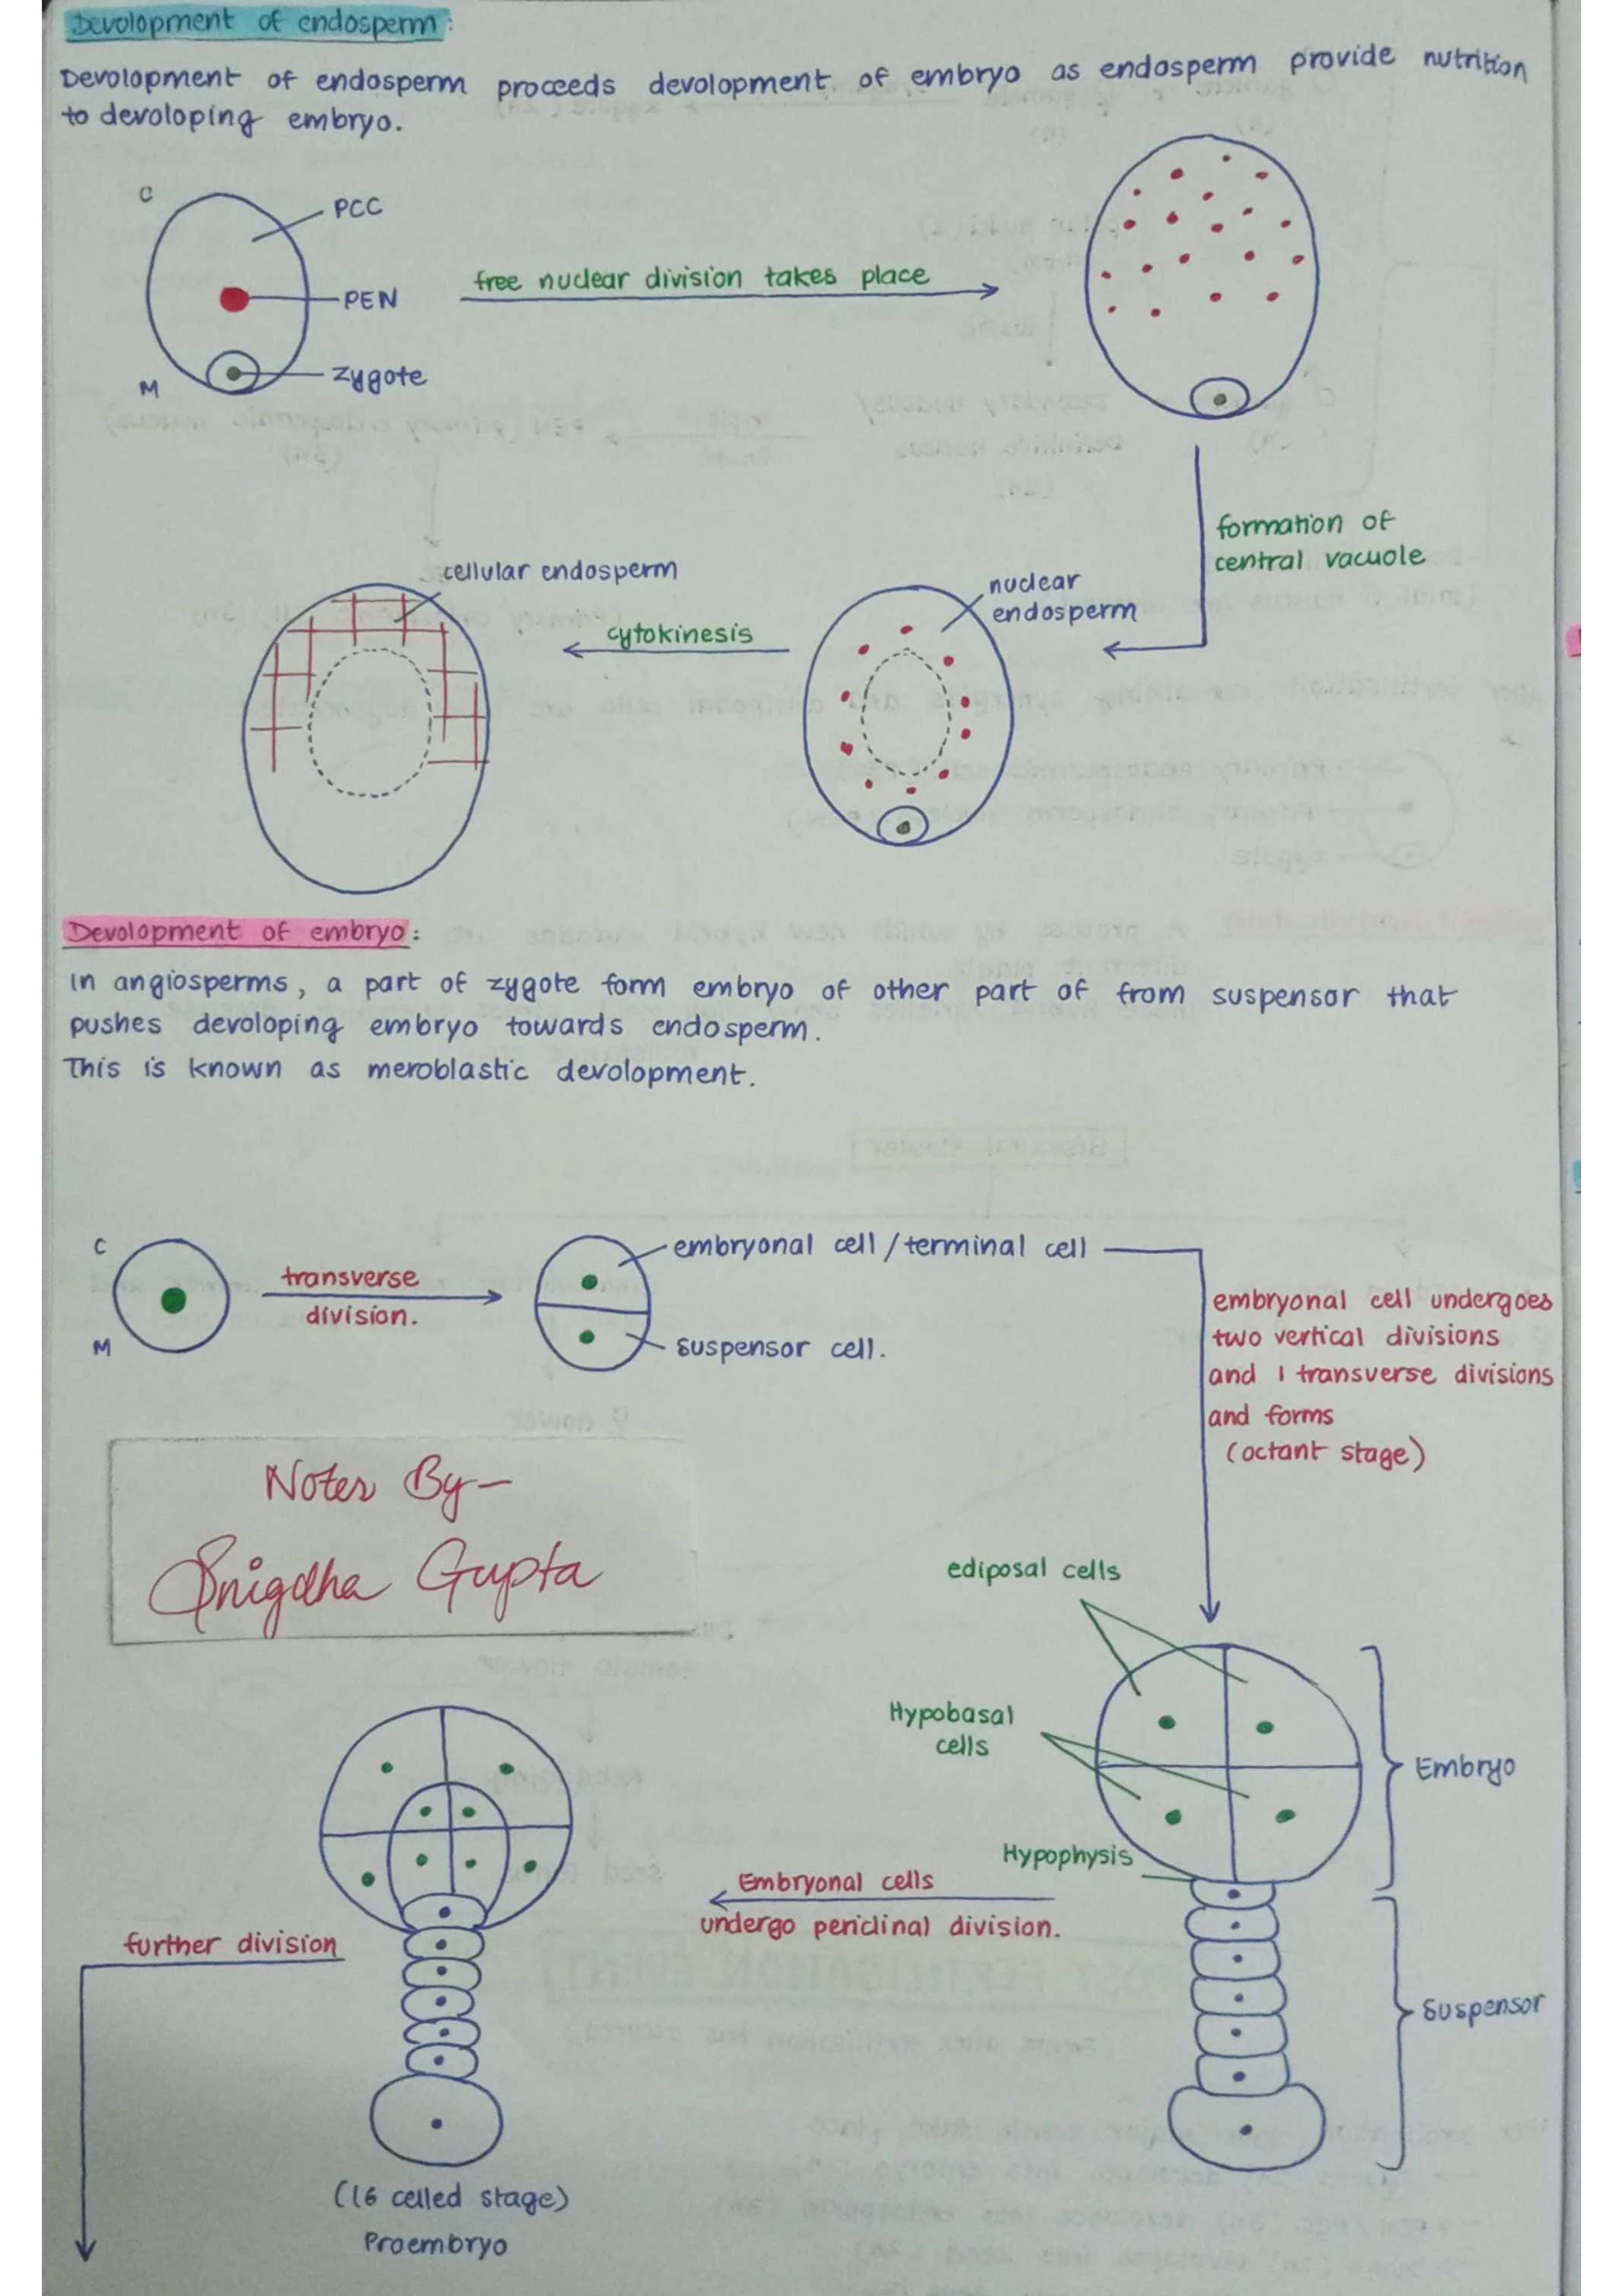 Sexual Reproduction in Flowering Plants - Biology Short Notes 📚